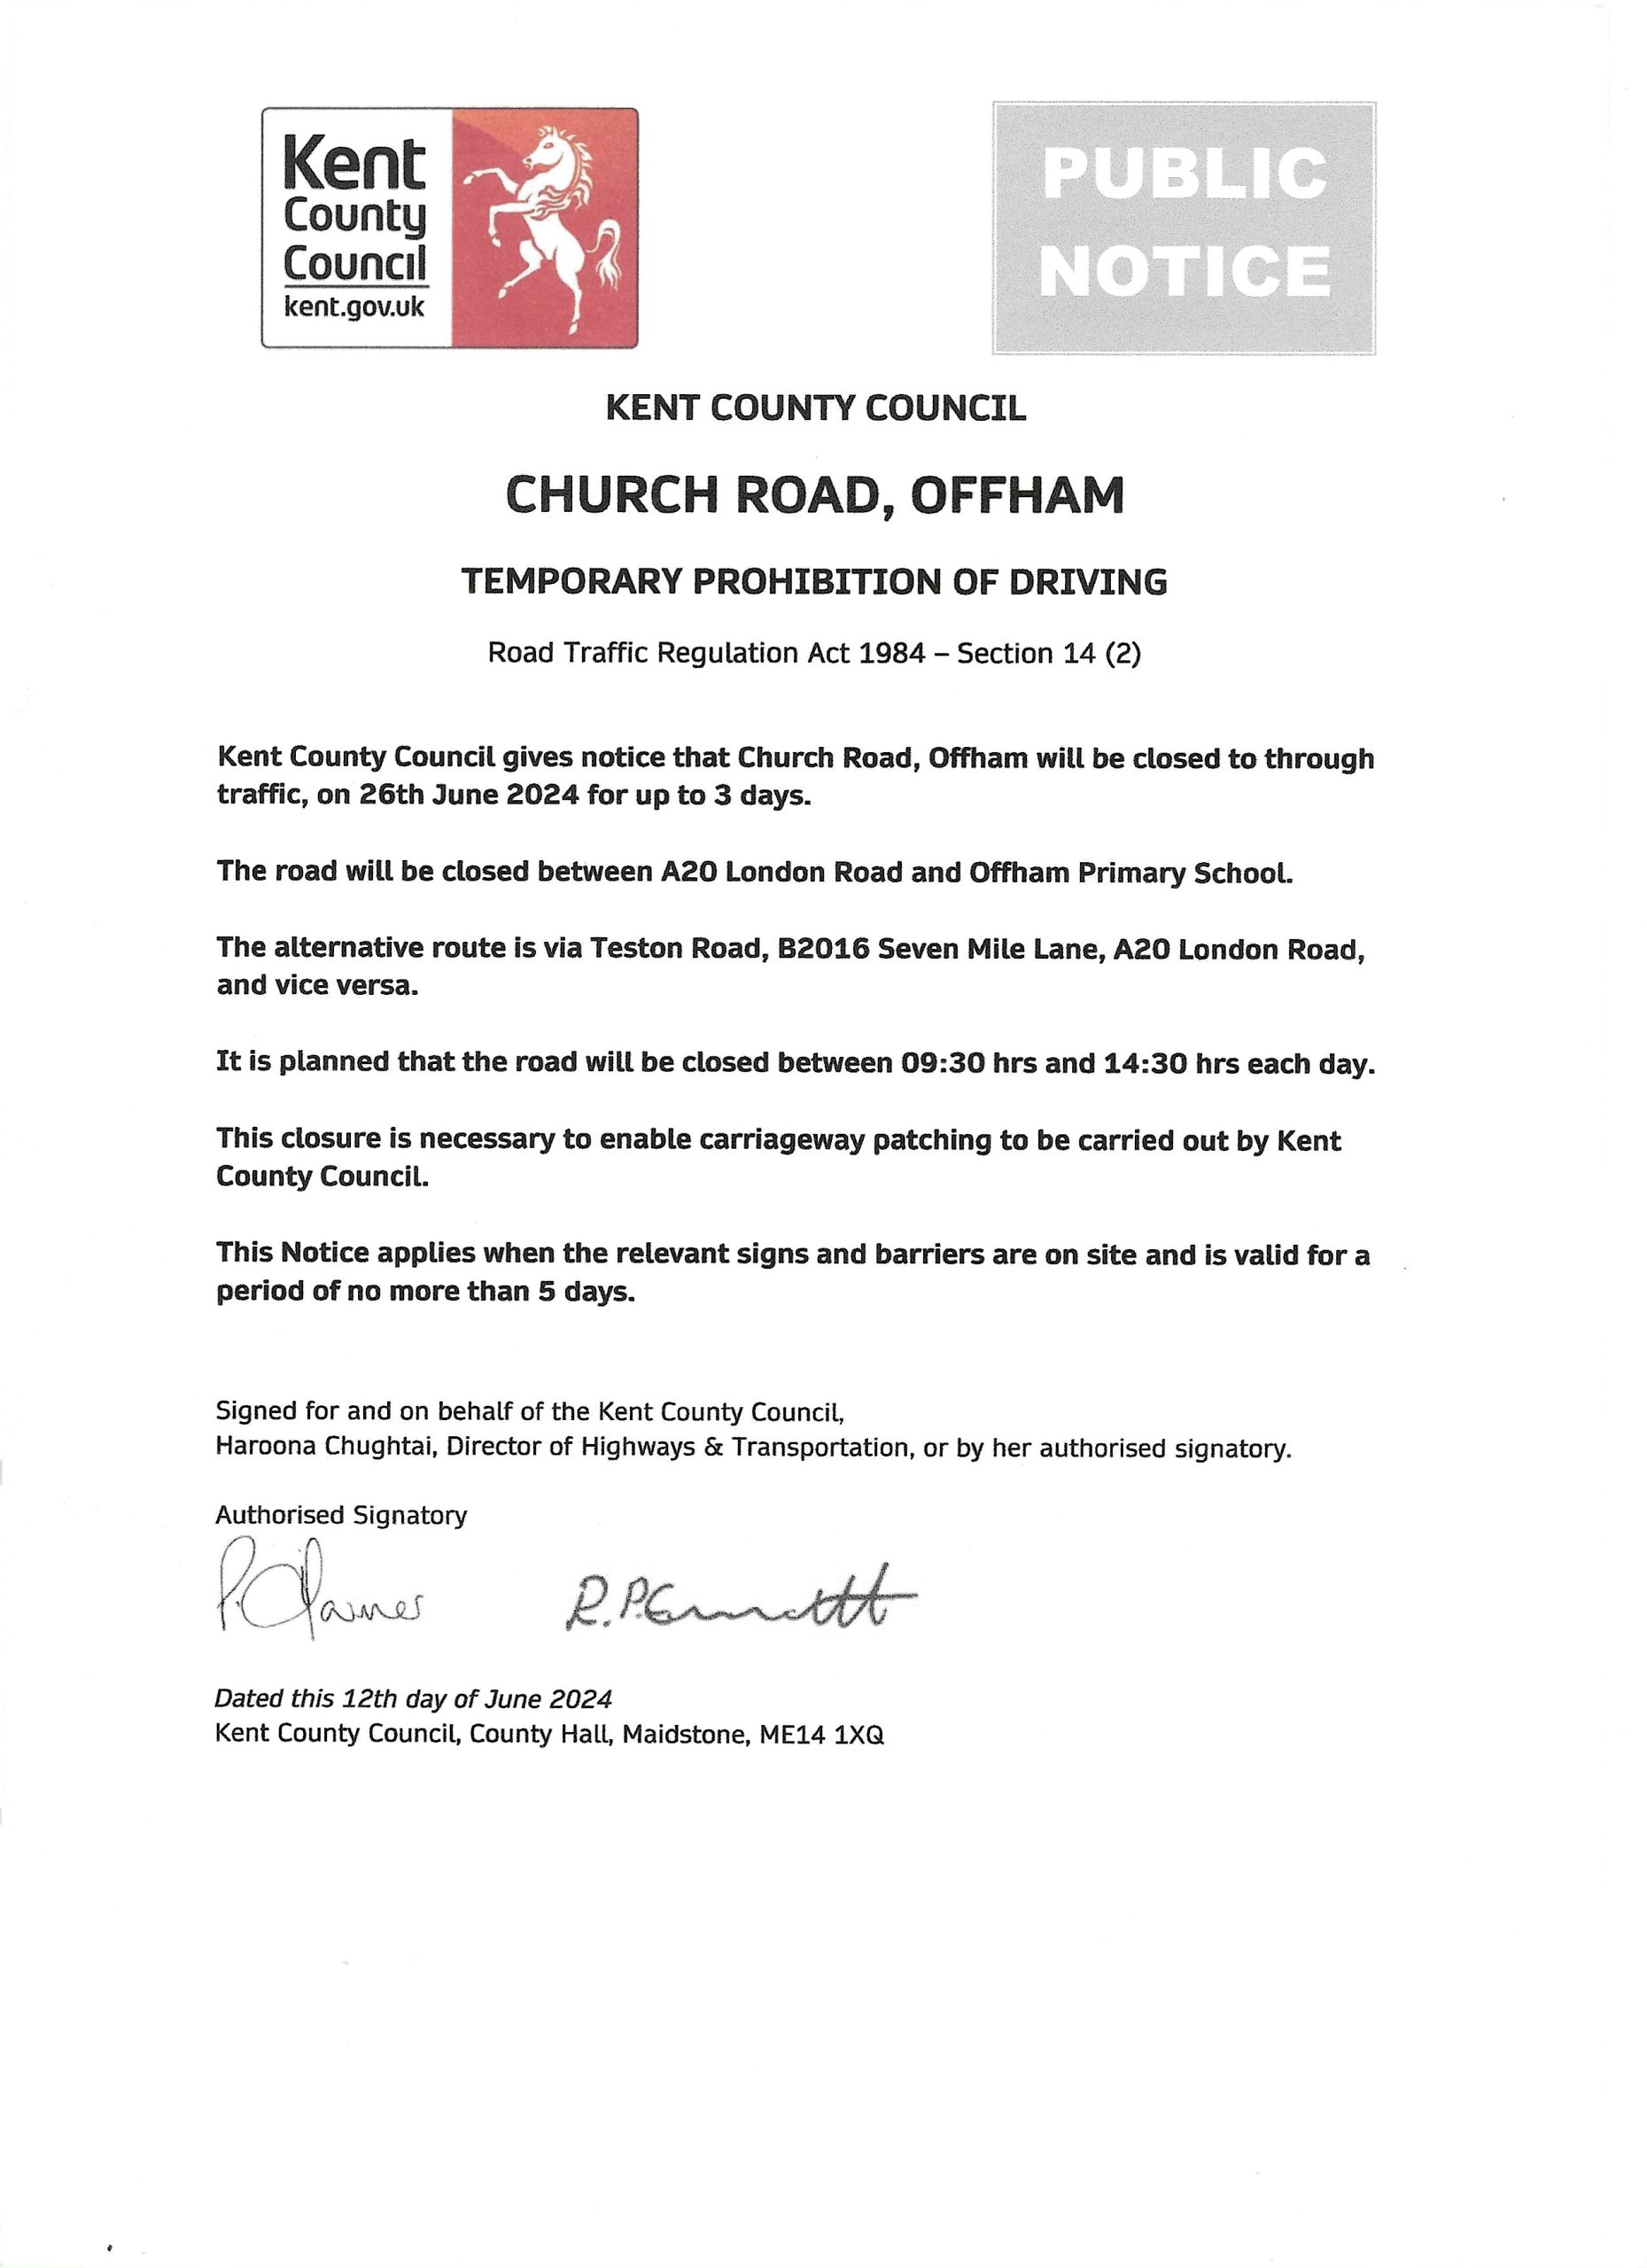 Church Road Closed from 26th June for up to three days between 09.30 hours and 14.30 hours each day between A20 London Road and Offham Primary School